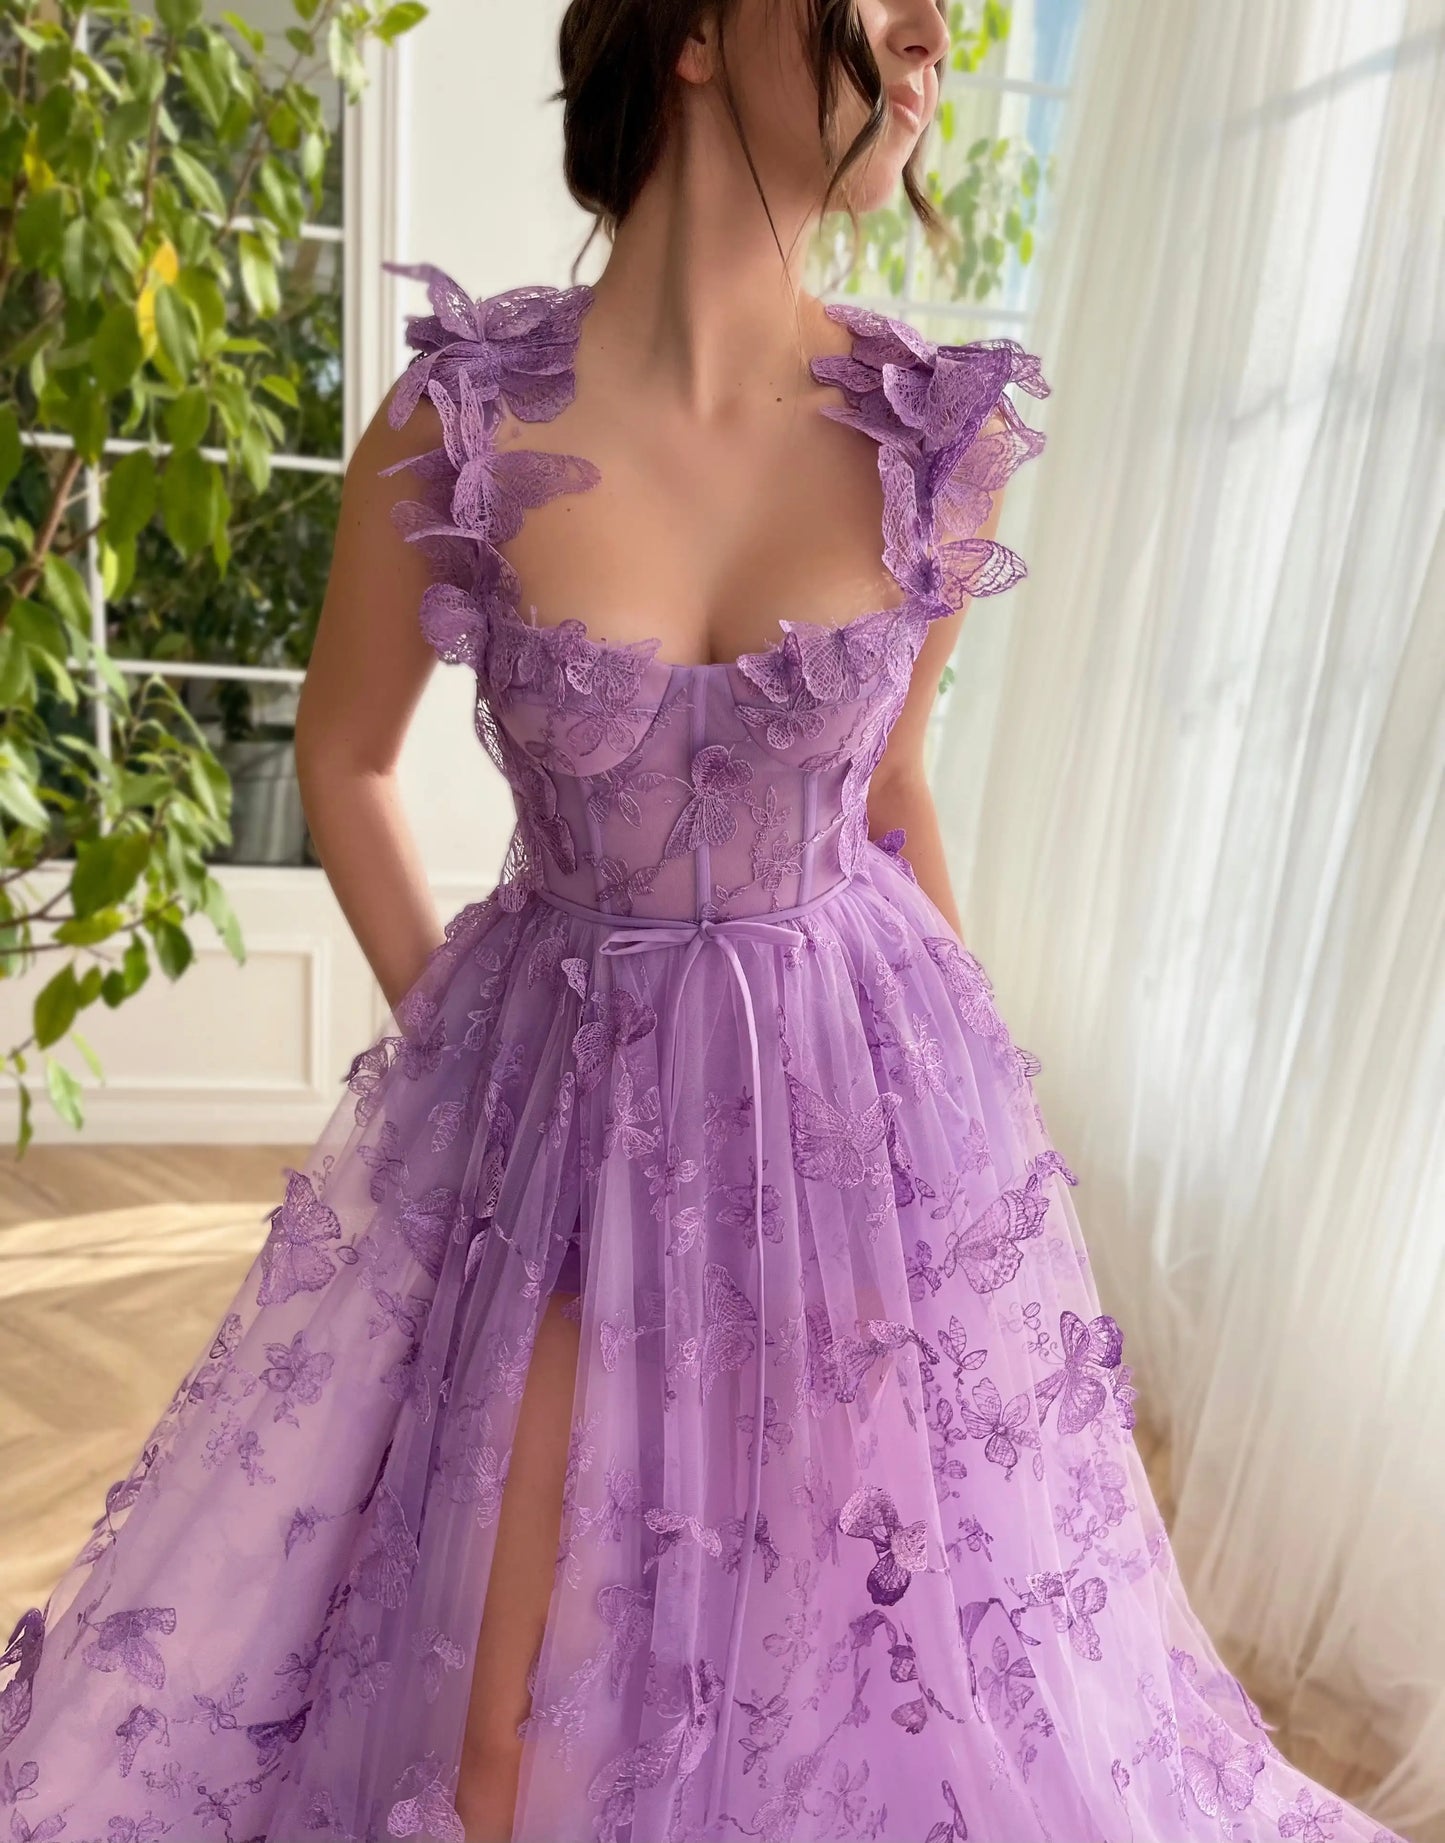 Lilac Lace Prom Dresses Butterfly Spaghetti Straps Sweetheart A Line with Pocket Belt Hi-lo Corset Zipper Back Evening Gown